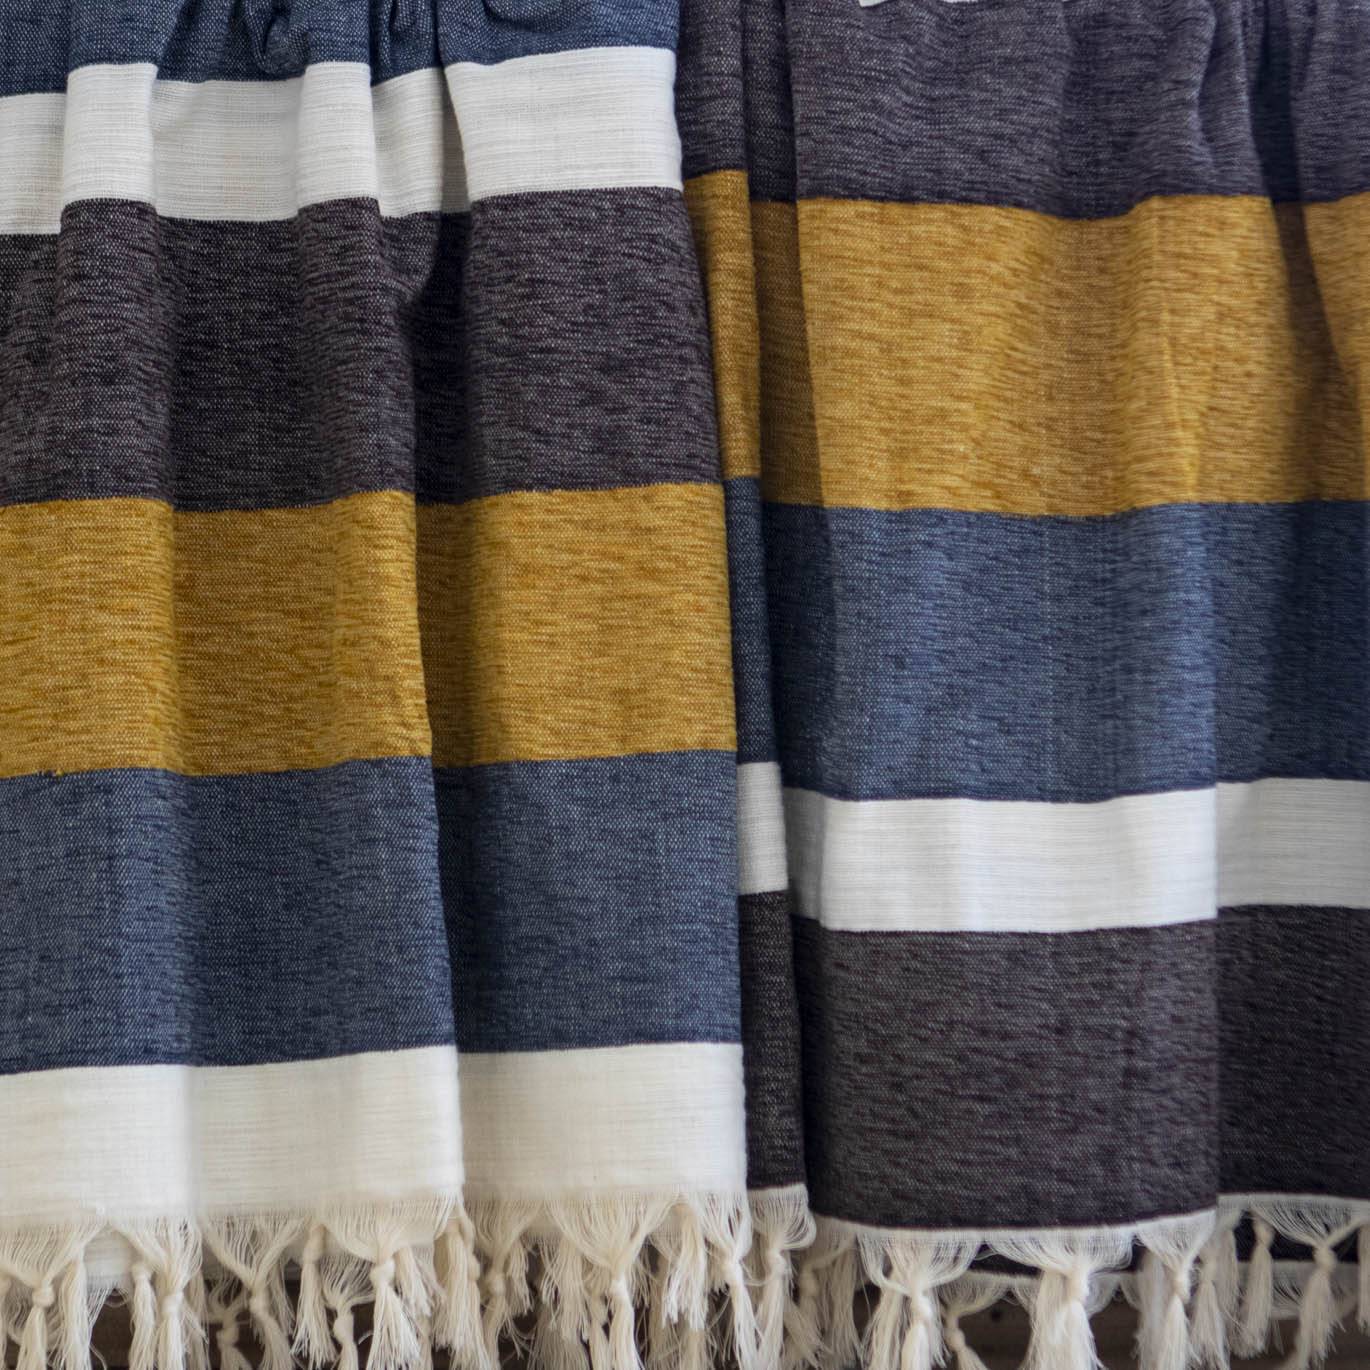 Hand-Woven Blanket - Autumn at the Lake - Near East Imports